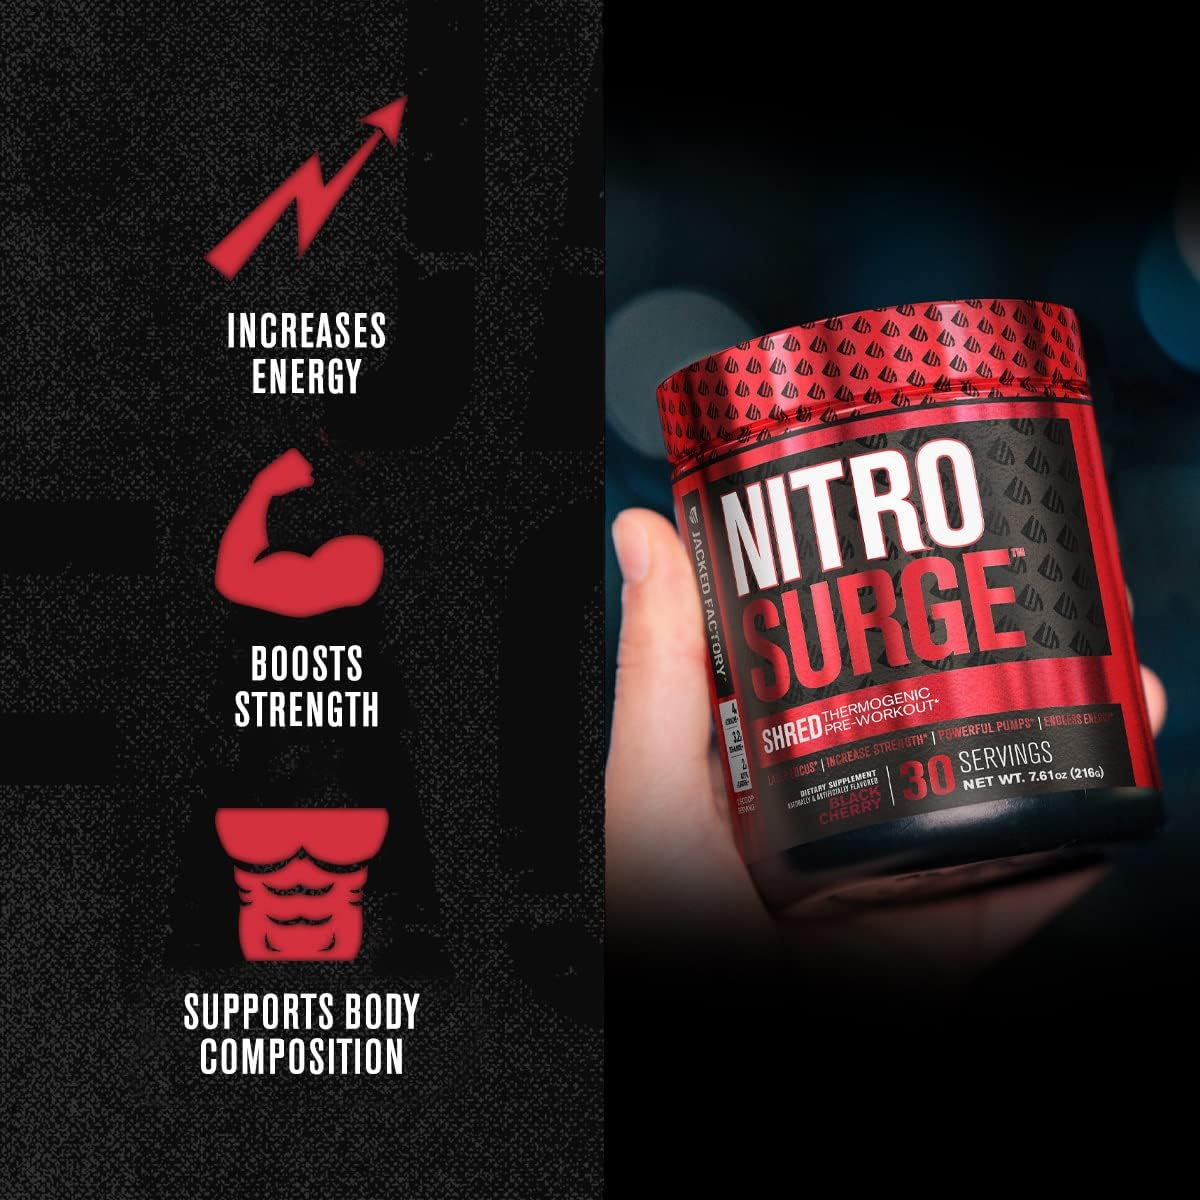 Jacked Factory Burn-XT Thermogenic Fat Burner  NITROSURGE Shred Thermogenic Pre-Workout in Fruit Punch for Men  Women